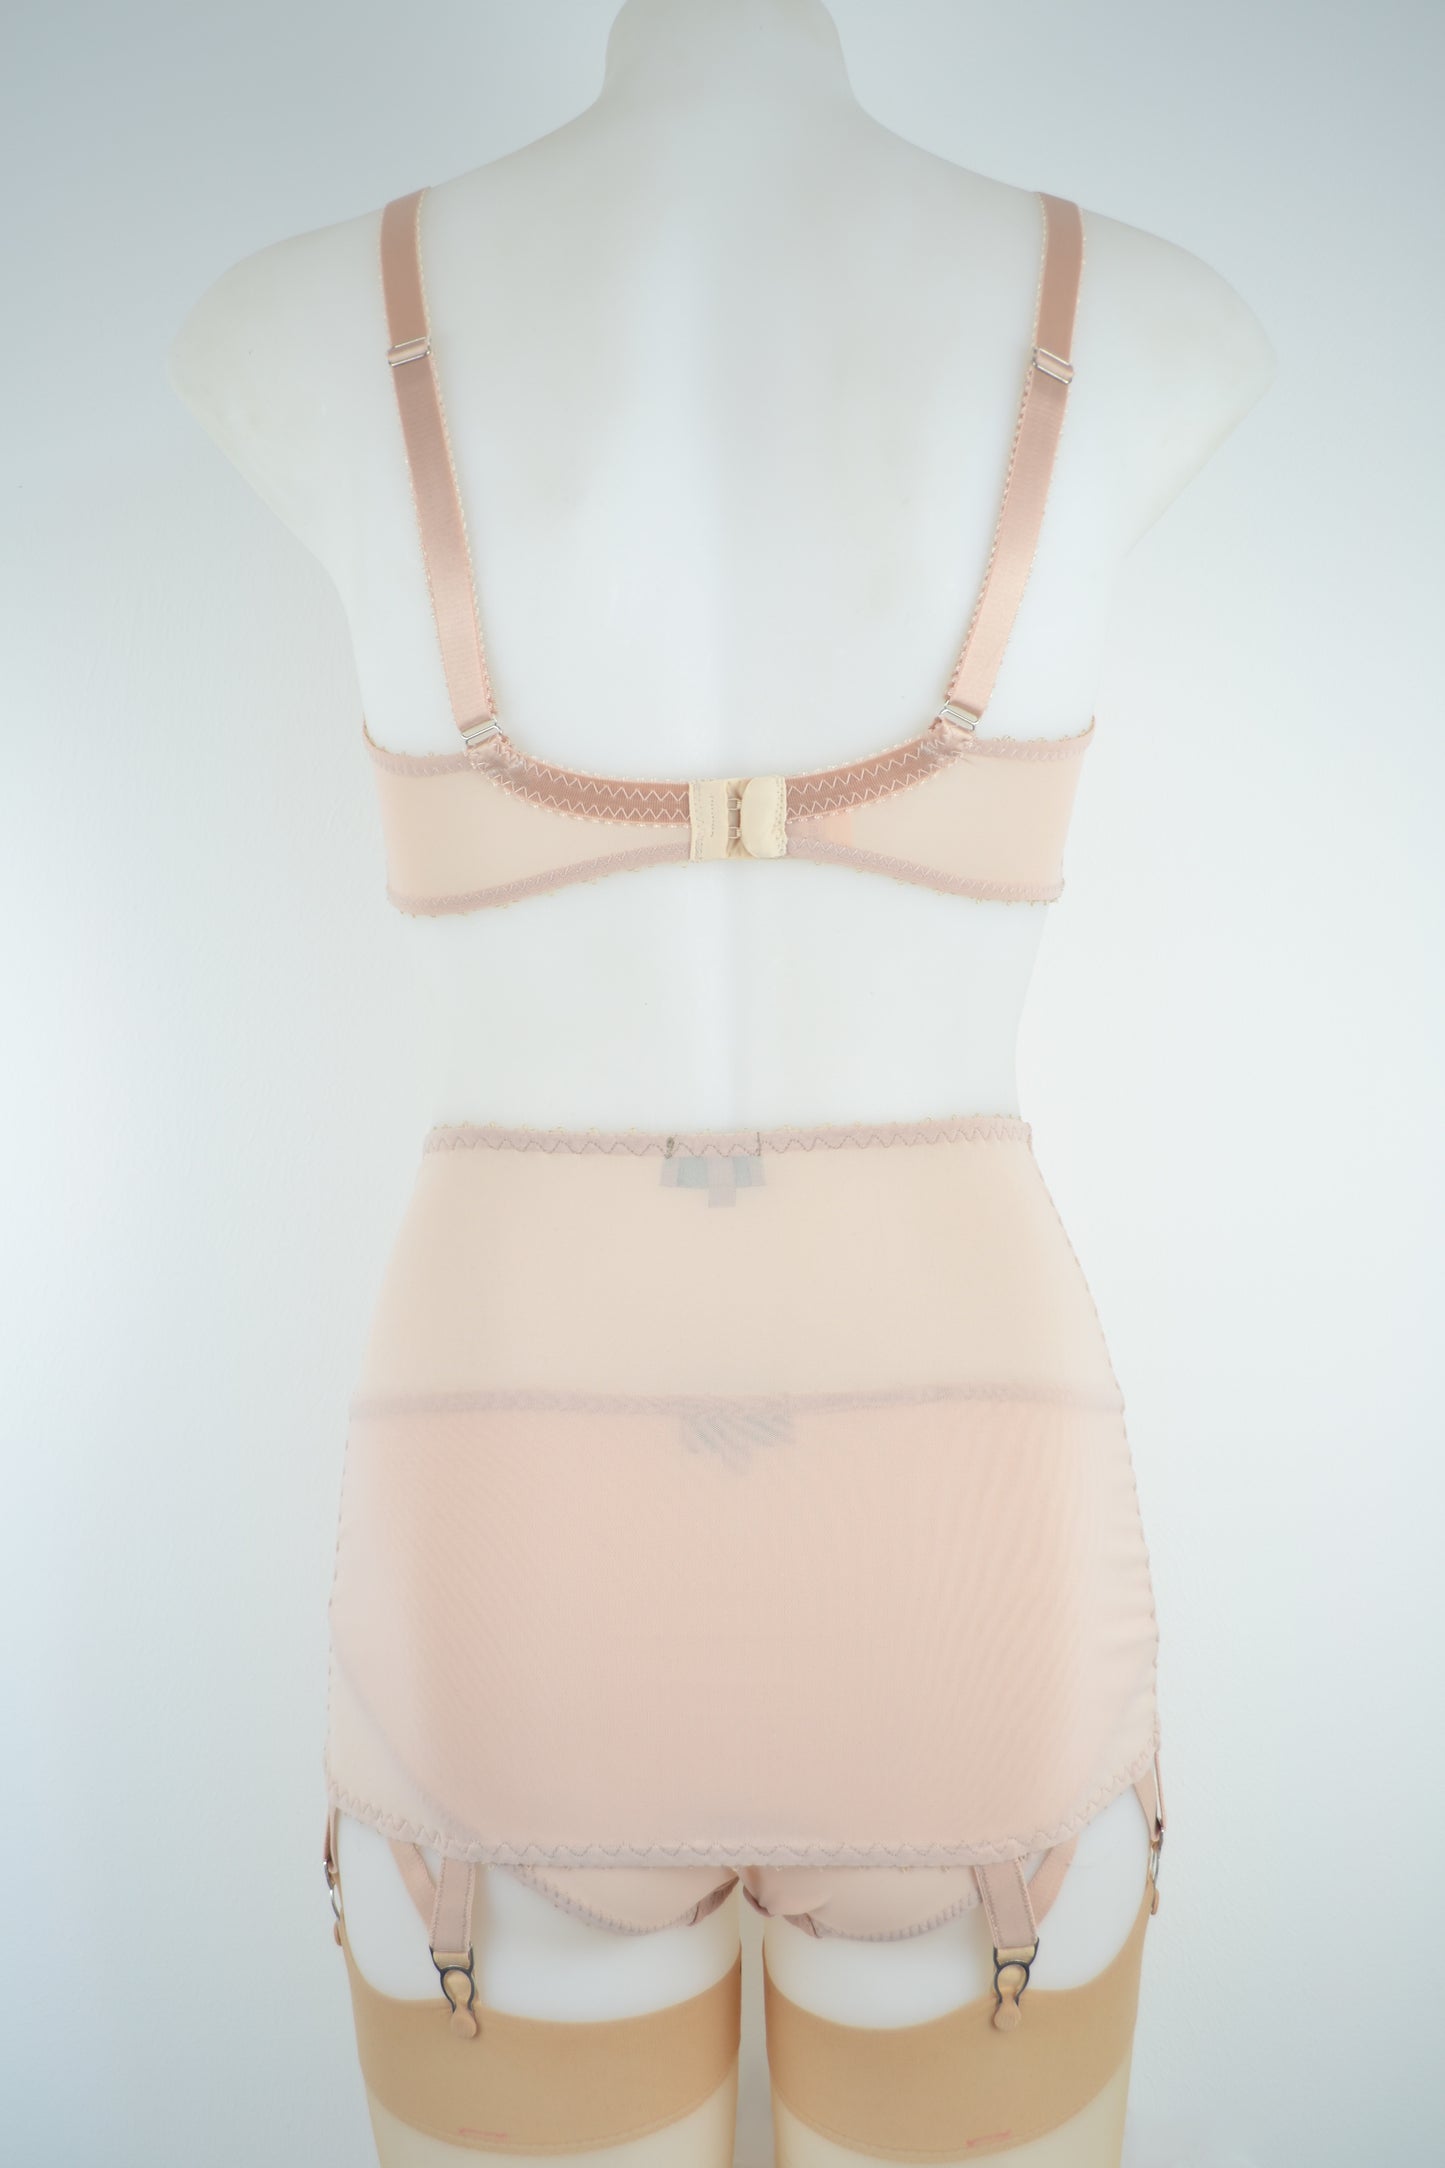 sheer biscotti nude skin flesh mesh roll on 6 strap girdle plus size retro and vintage inspired lingerie by pip and pantalaimon made in the uk